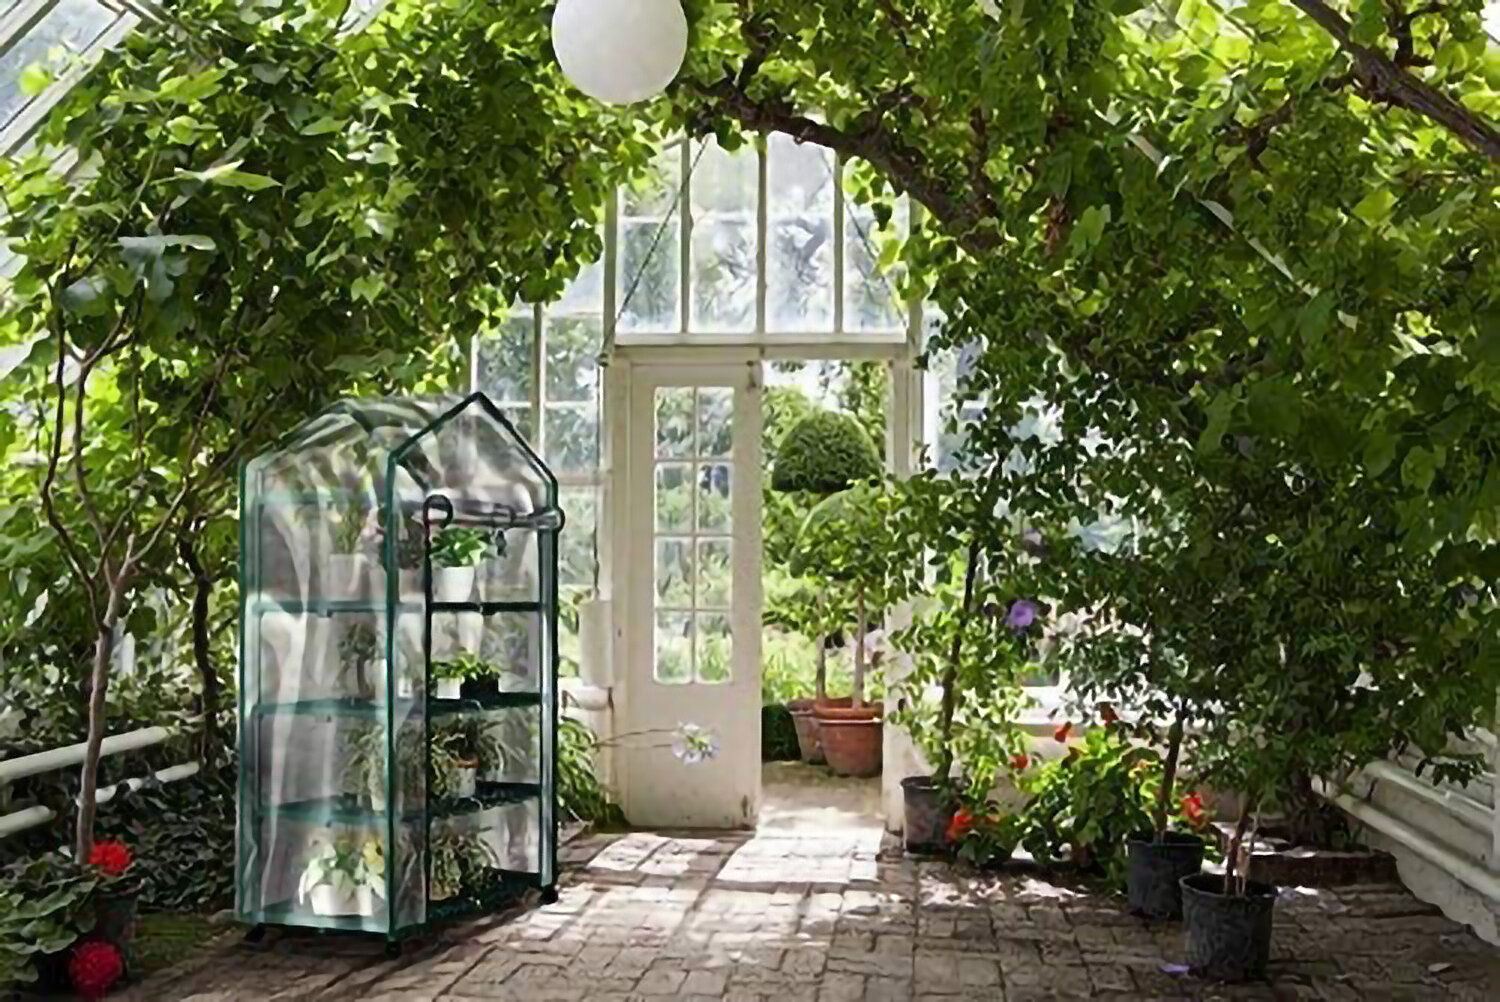 SONGMICS Garden Greenhouse Backyard 143 x 215 x 195 cm Grow House for Outdoors Roll-up Door Walk-in Plant Shed with 14 Shelves Patio Green GWP13GN Terrace